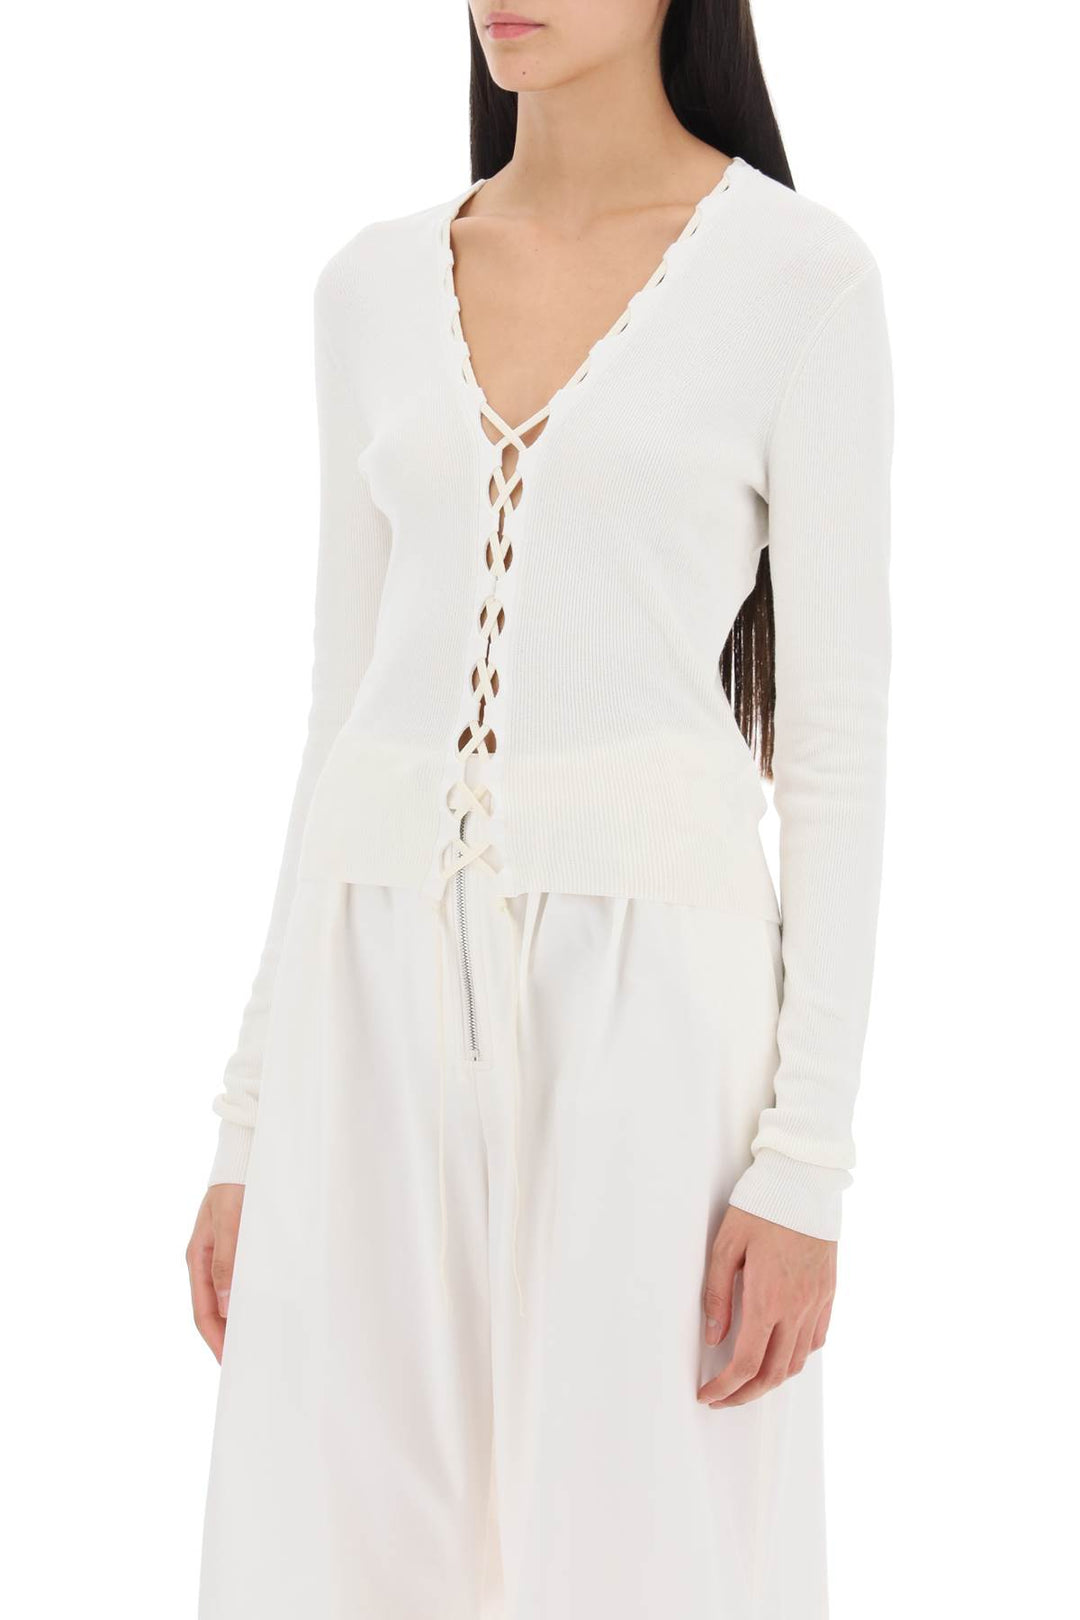 Dion Lee Lace Up Cardigan   Bianco